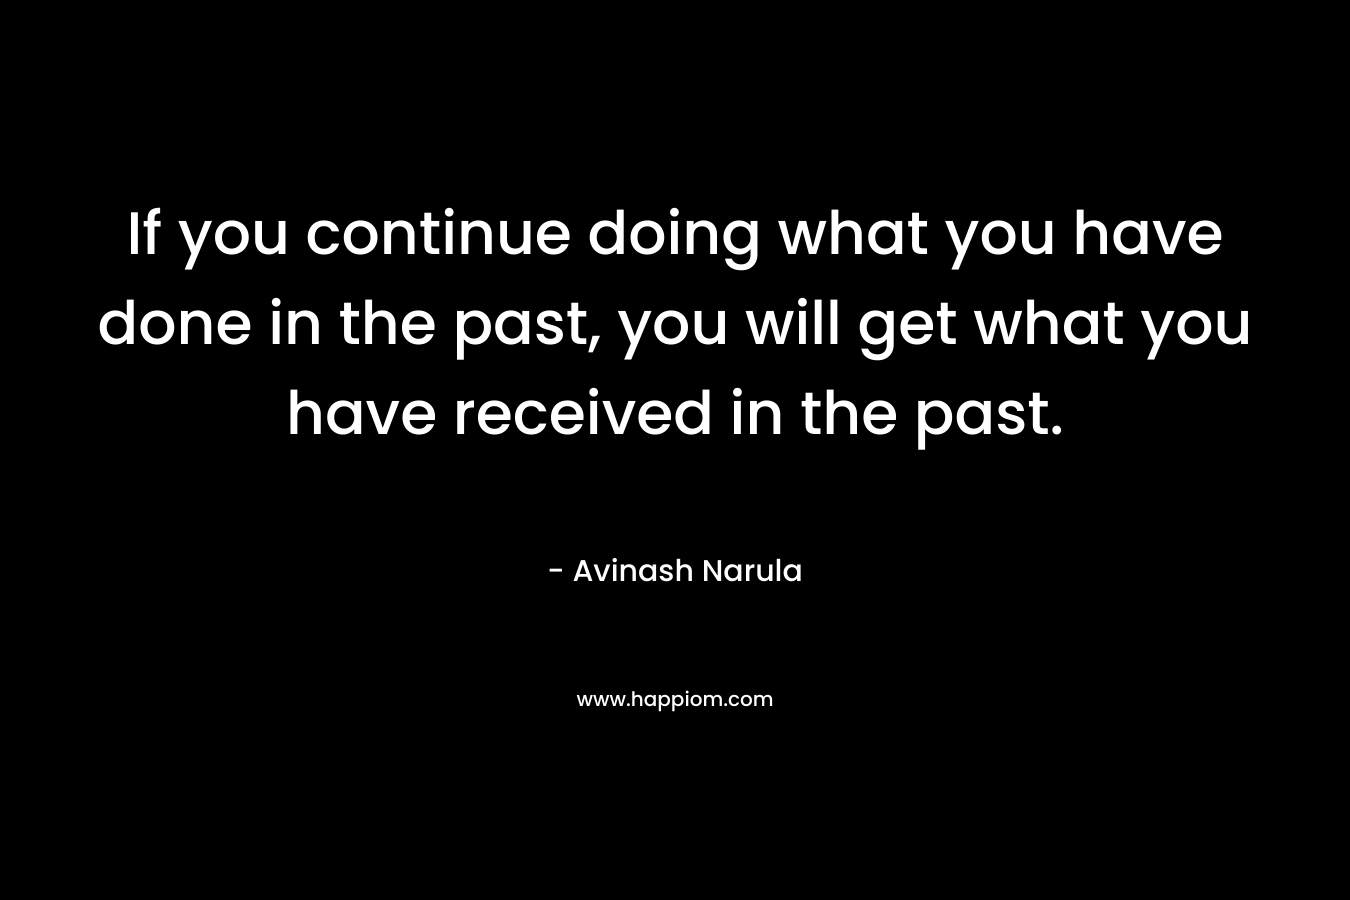 If you continue doing what you have done in the past, you will get what you have received in the past.